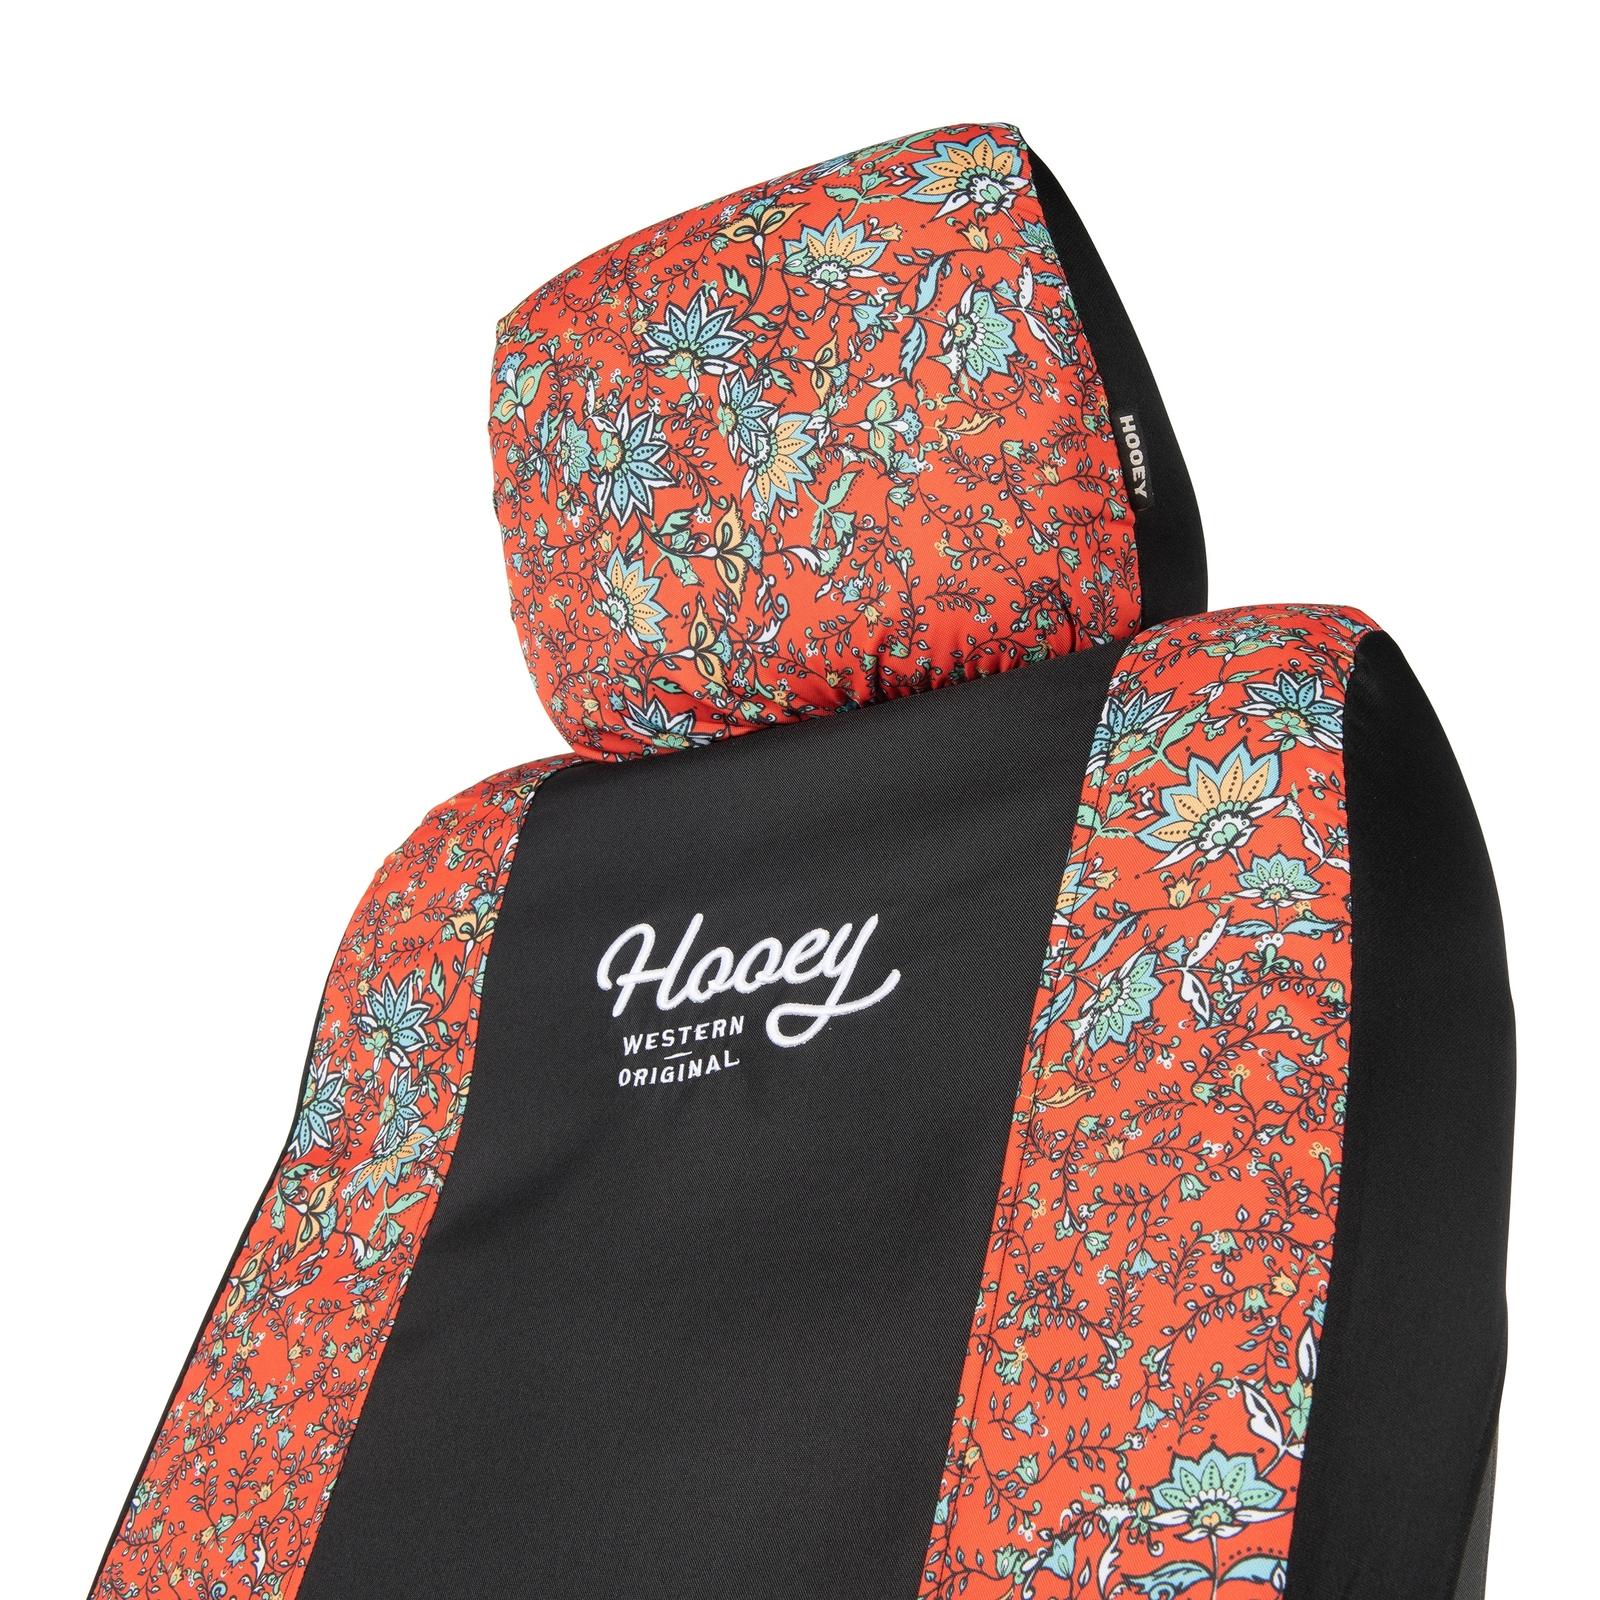 Hooey Riggin Low Back Seat Cover